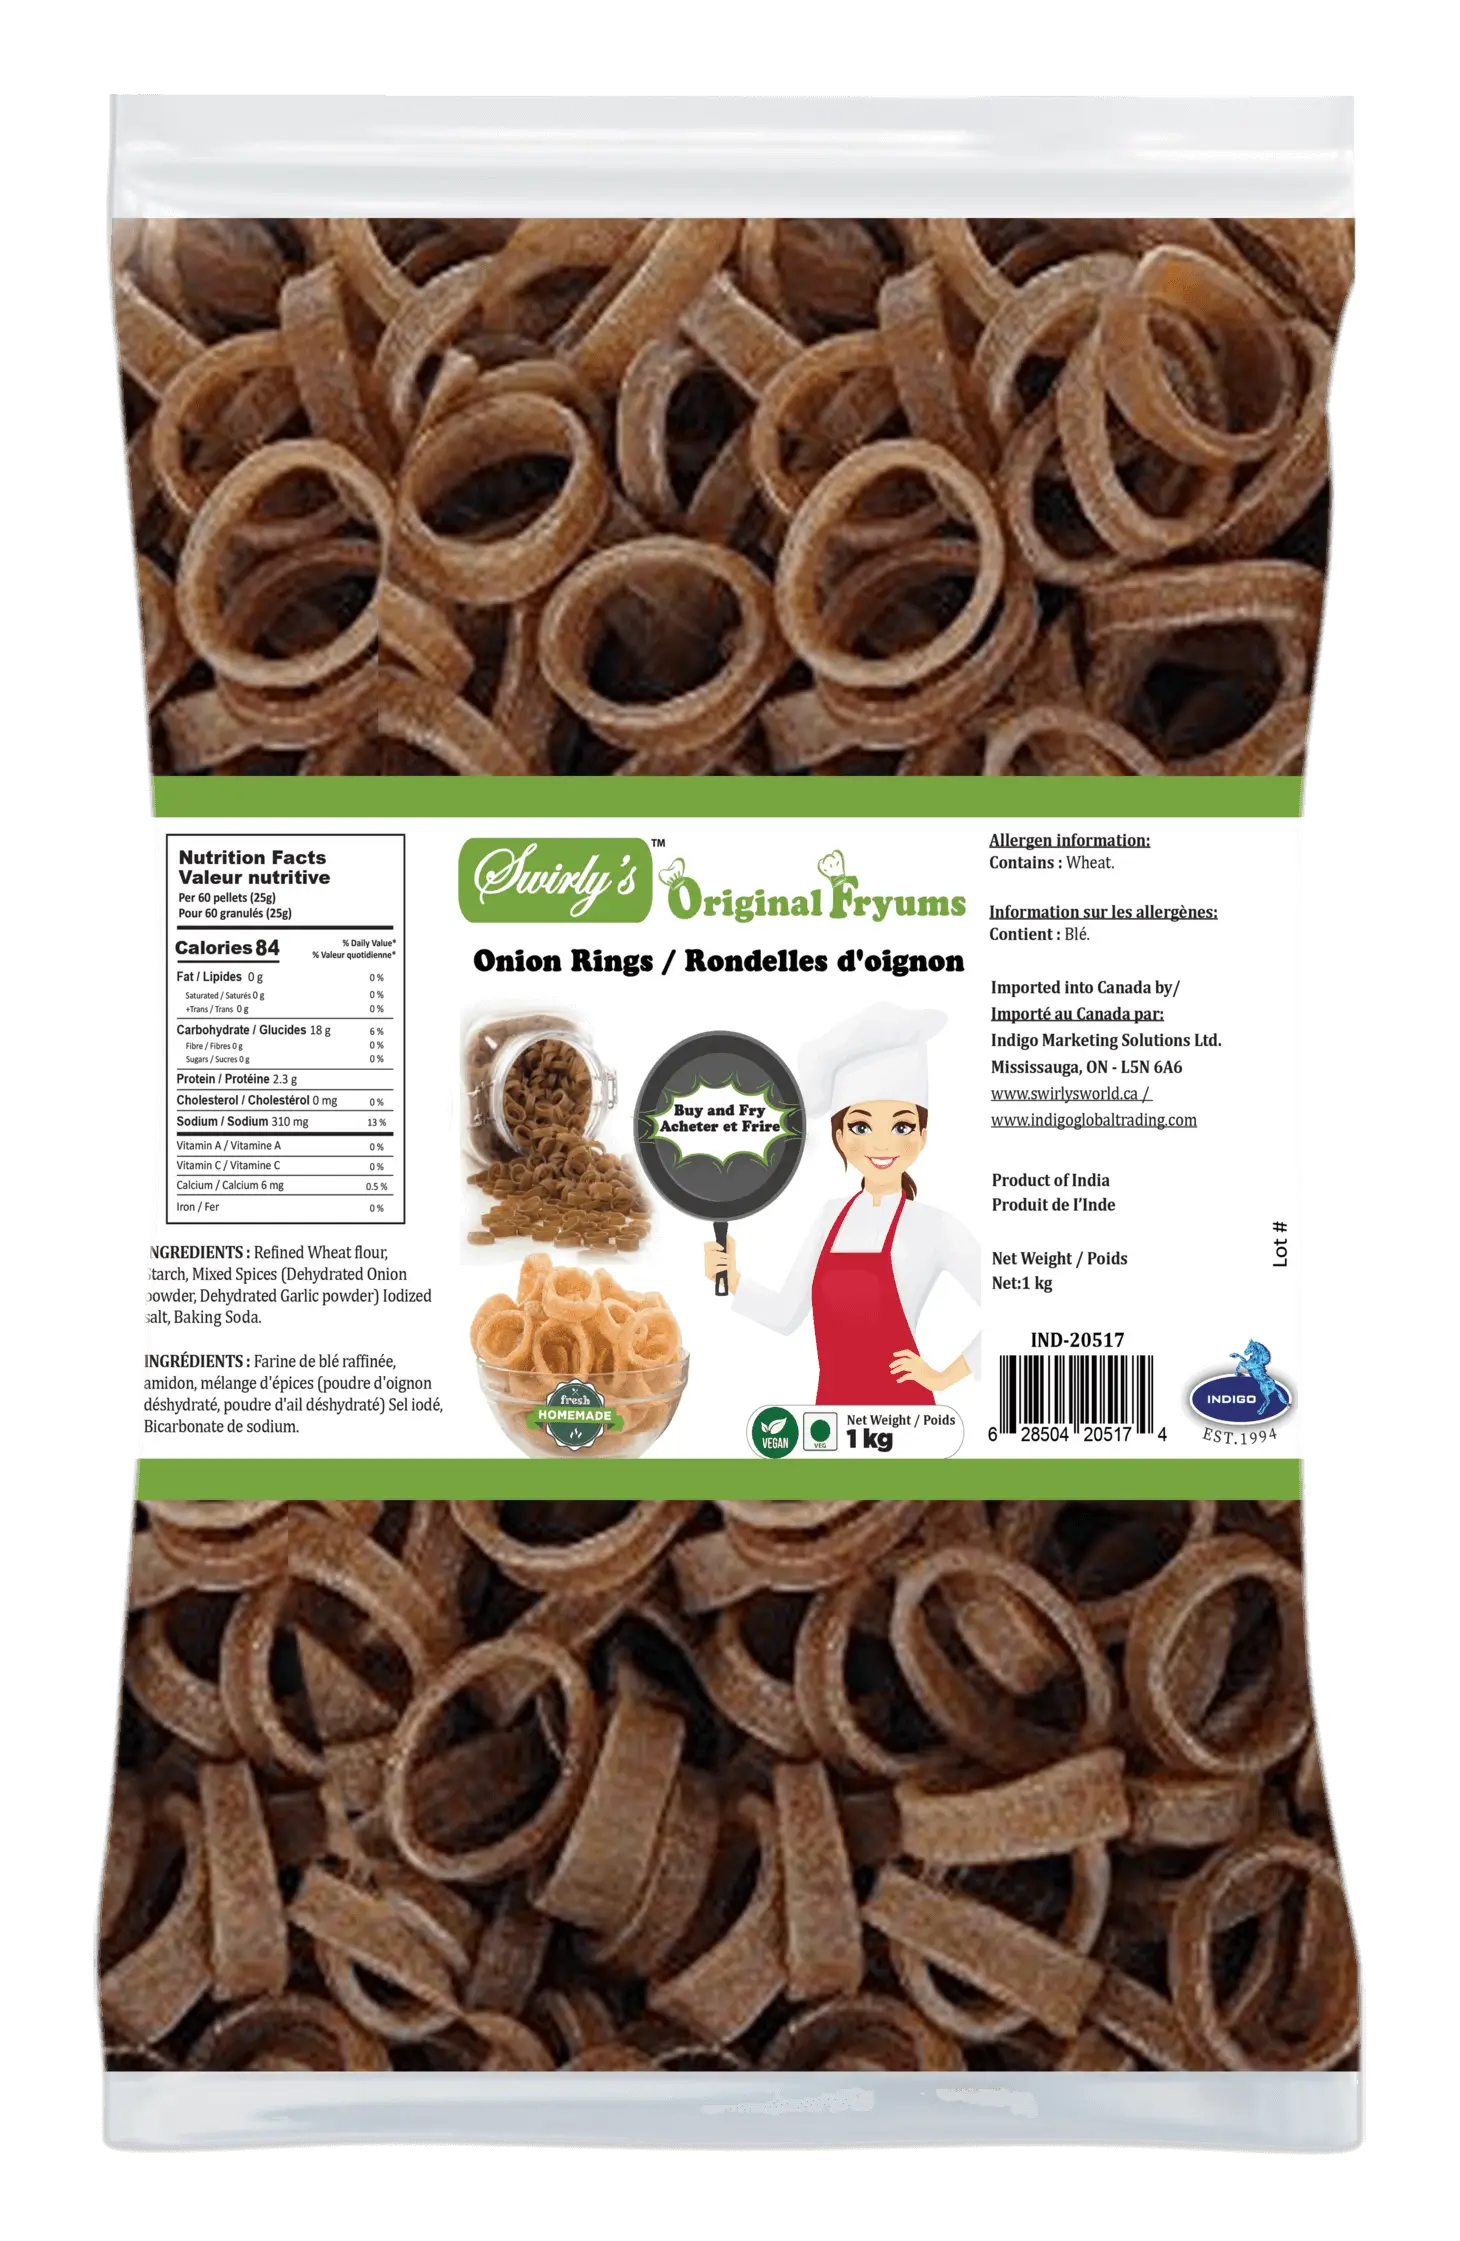 Buy Veganic Crunchy Onion Rings Fryums Papad with Tastemaker - 400gm |  Healthy Snacks | Fry Or Microwave | Lord of The Ring Shape Online at Best  Prices in India - JioMart.